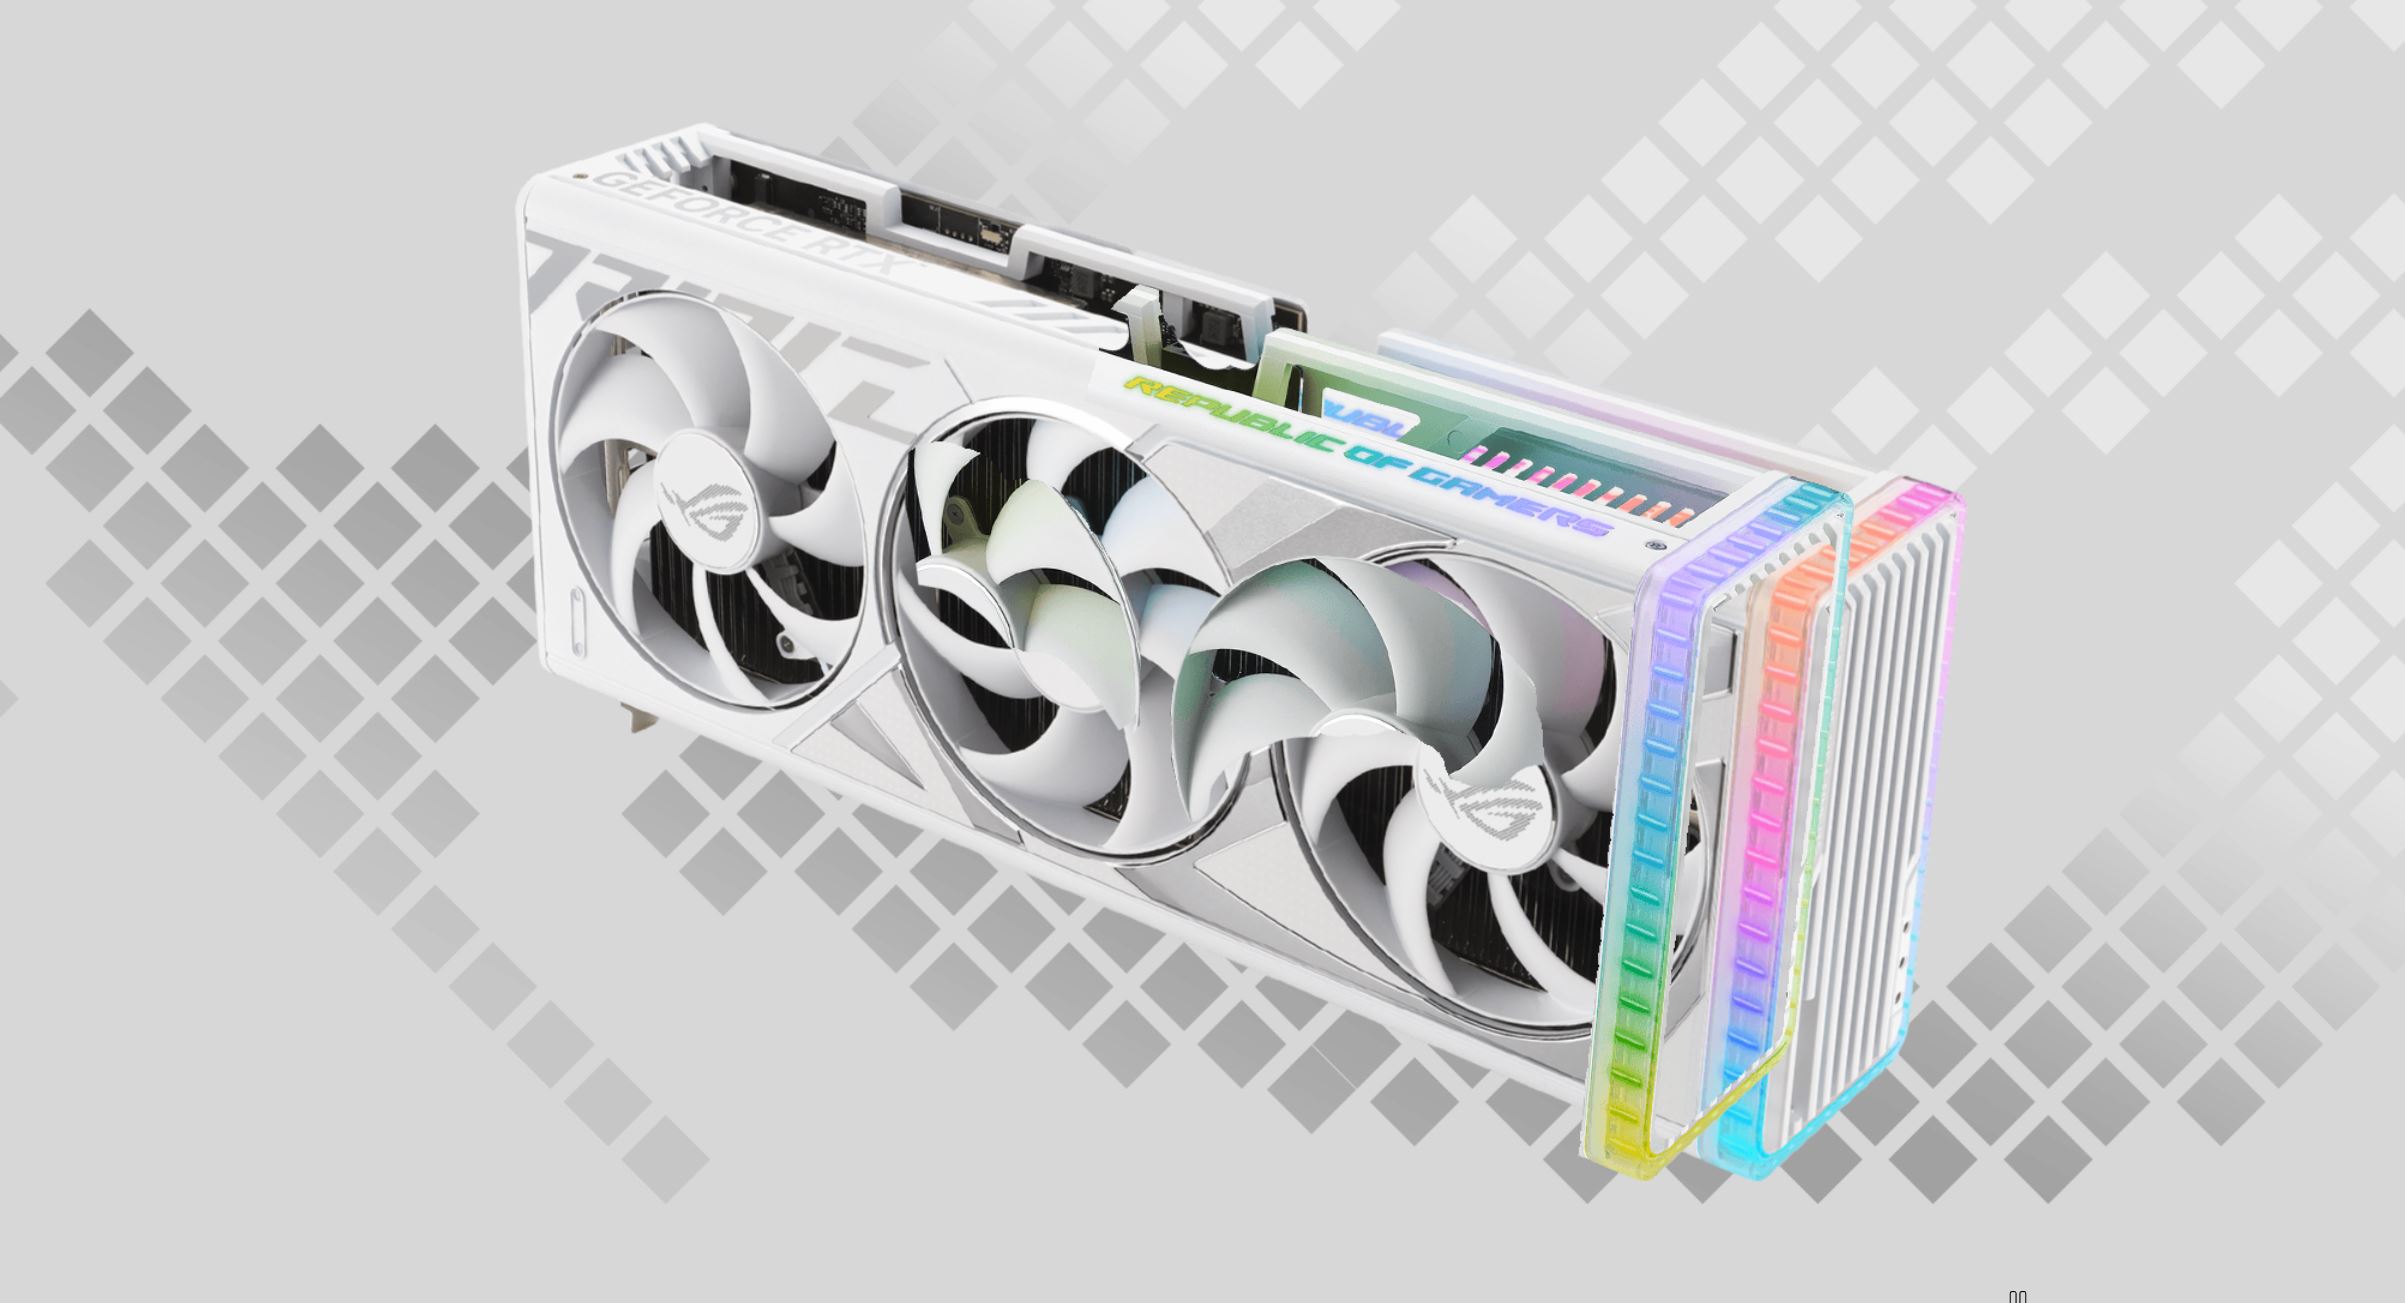 ASUS introduces ROG STRIX GeForce cards in white -